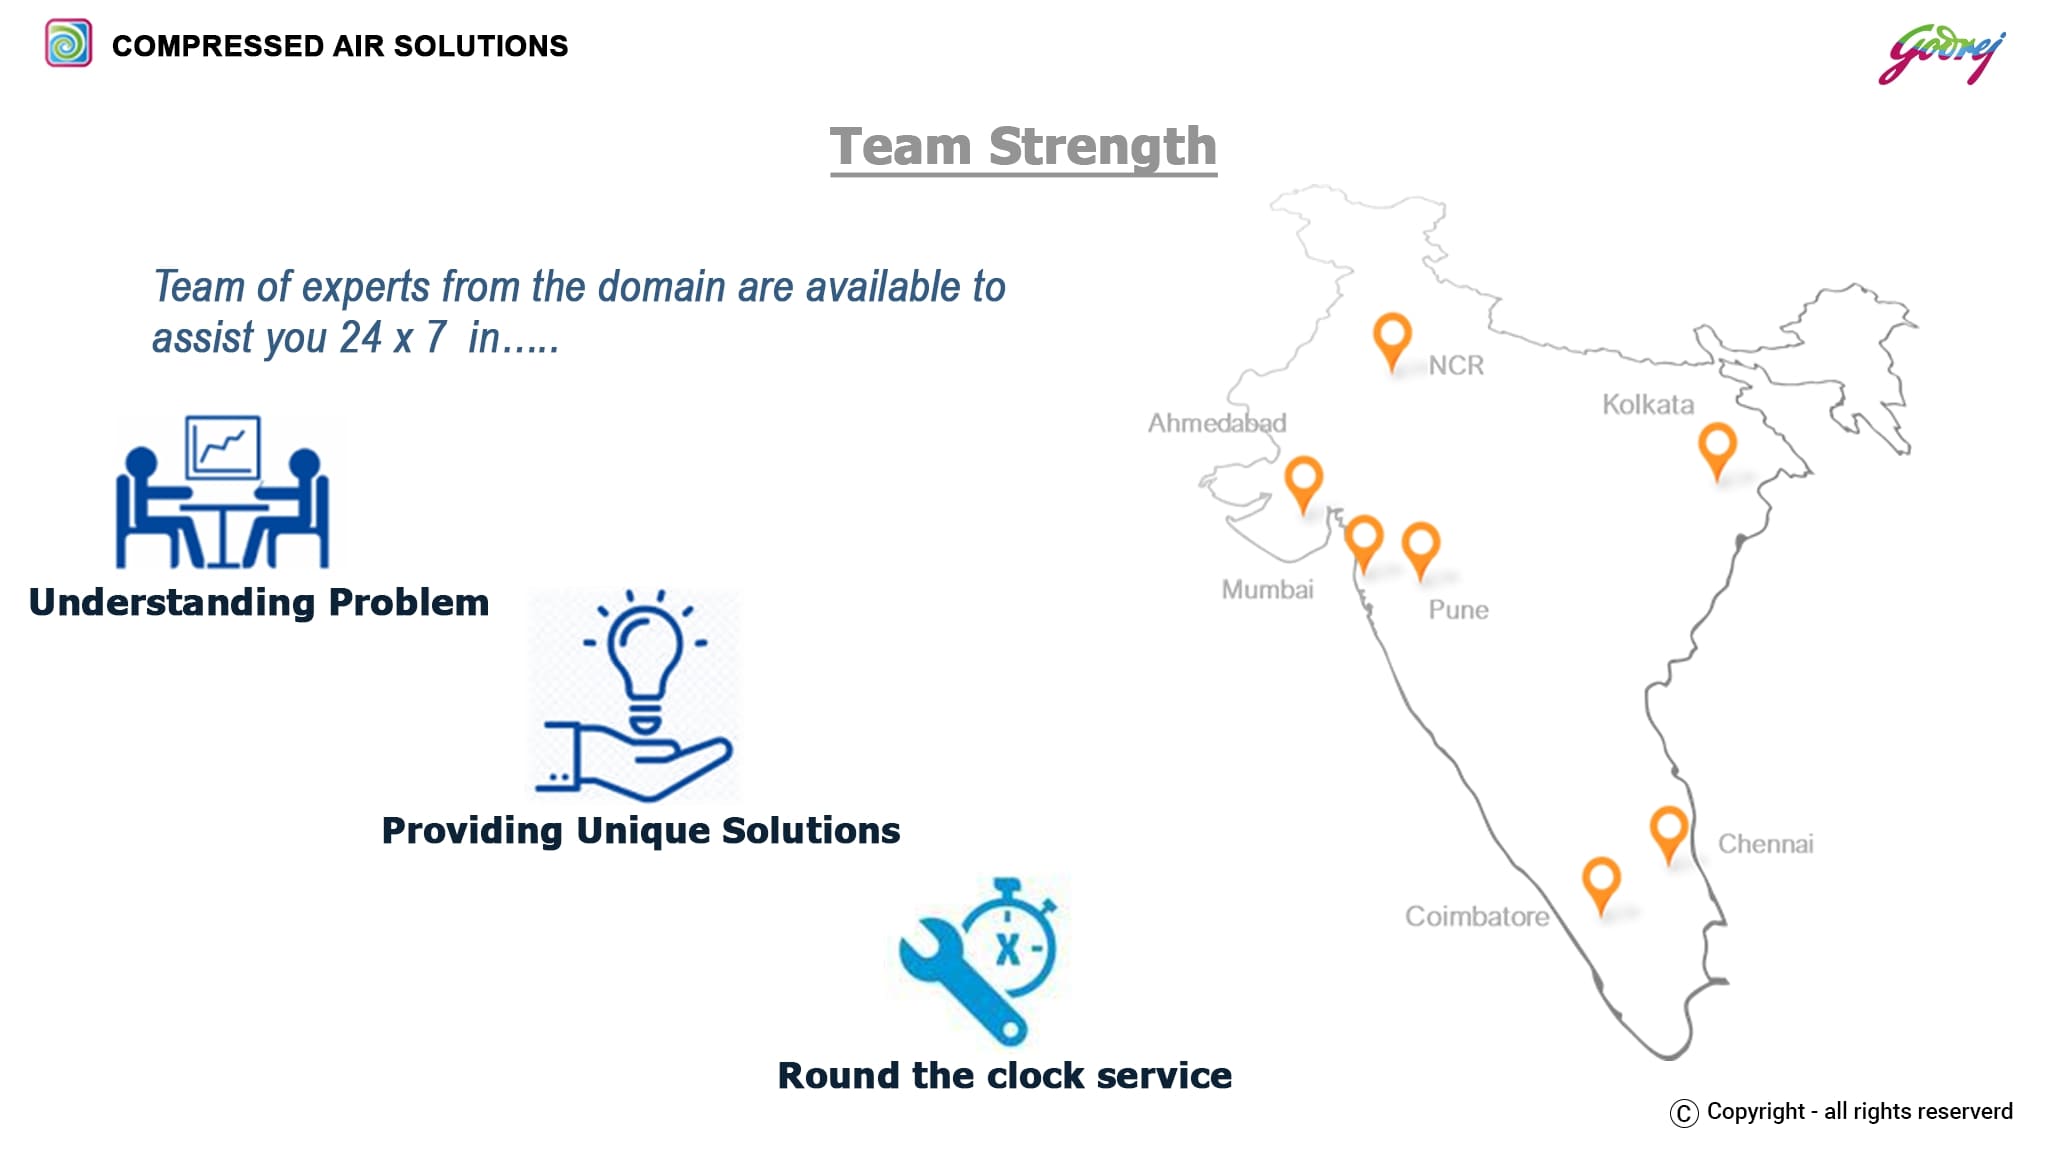 Team Strength-ENERGY SAVING SOLUTIONS IN COMPRESSED AIR NETWORK (GODREJ)